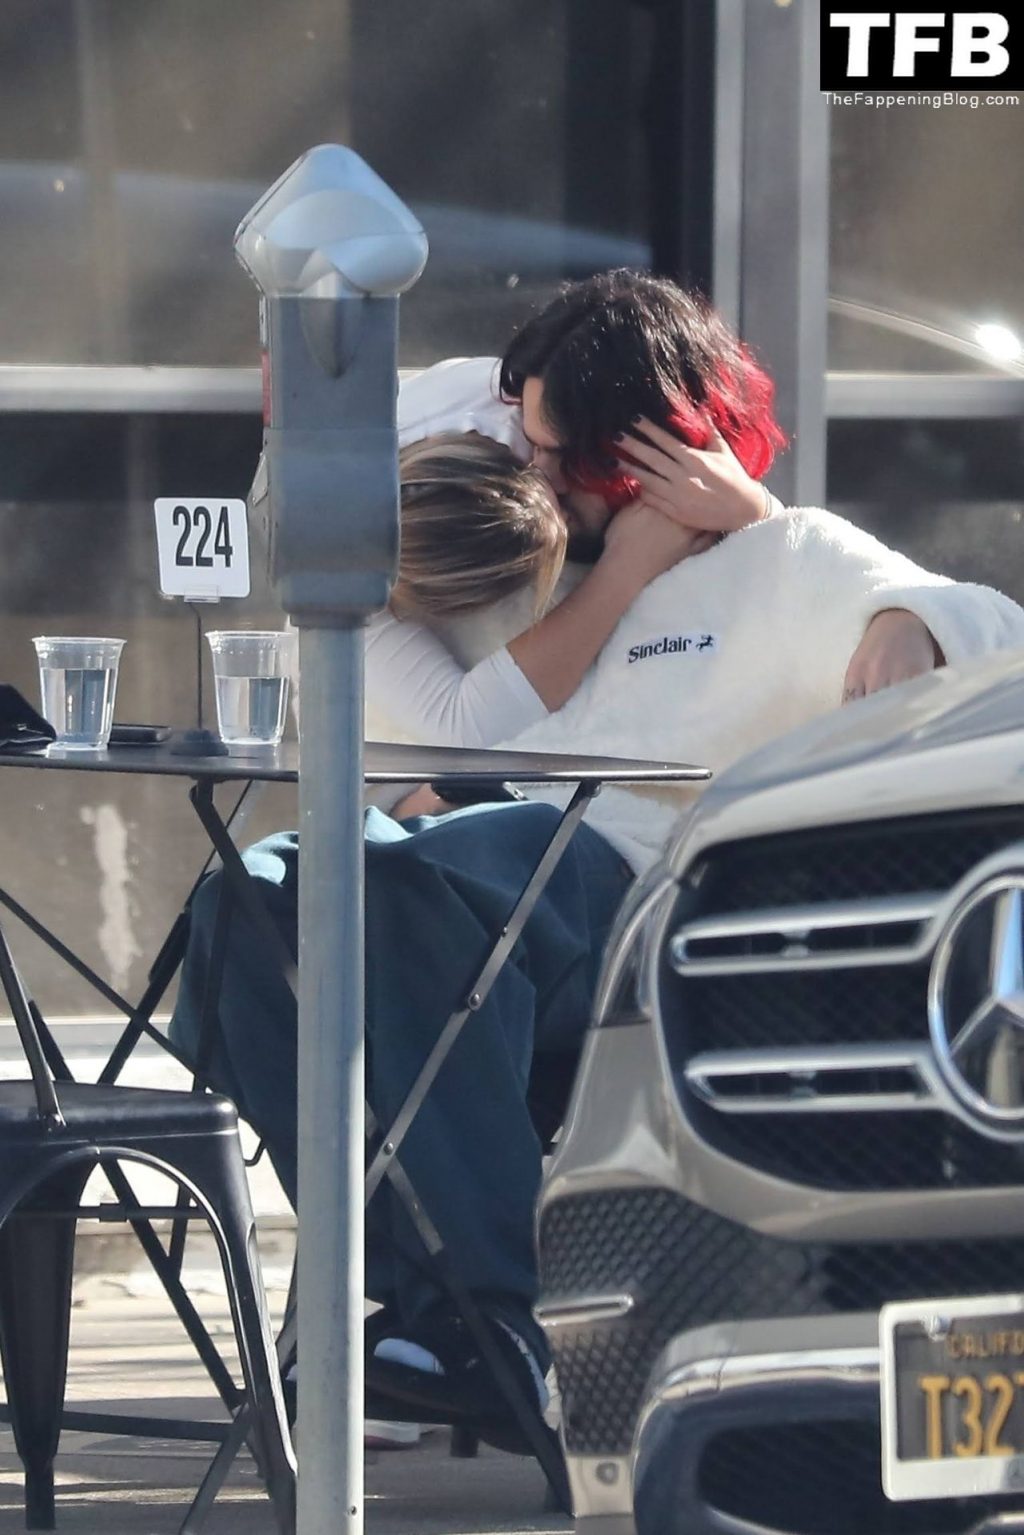 Addison Rae Braless The Fappening Blog 6 1024x1535 - Braless Addison Rae & Omer Fedi Share a Sweet PDA Moment While Waiting For Breakfast (68 Photos)